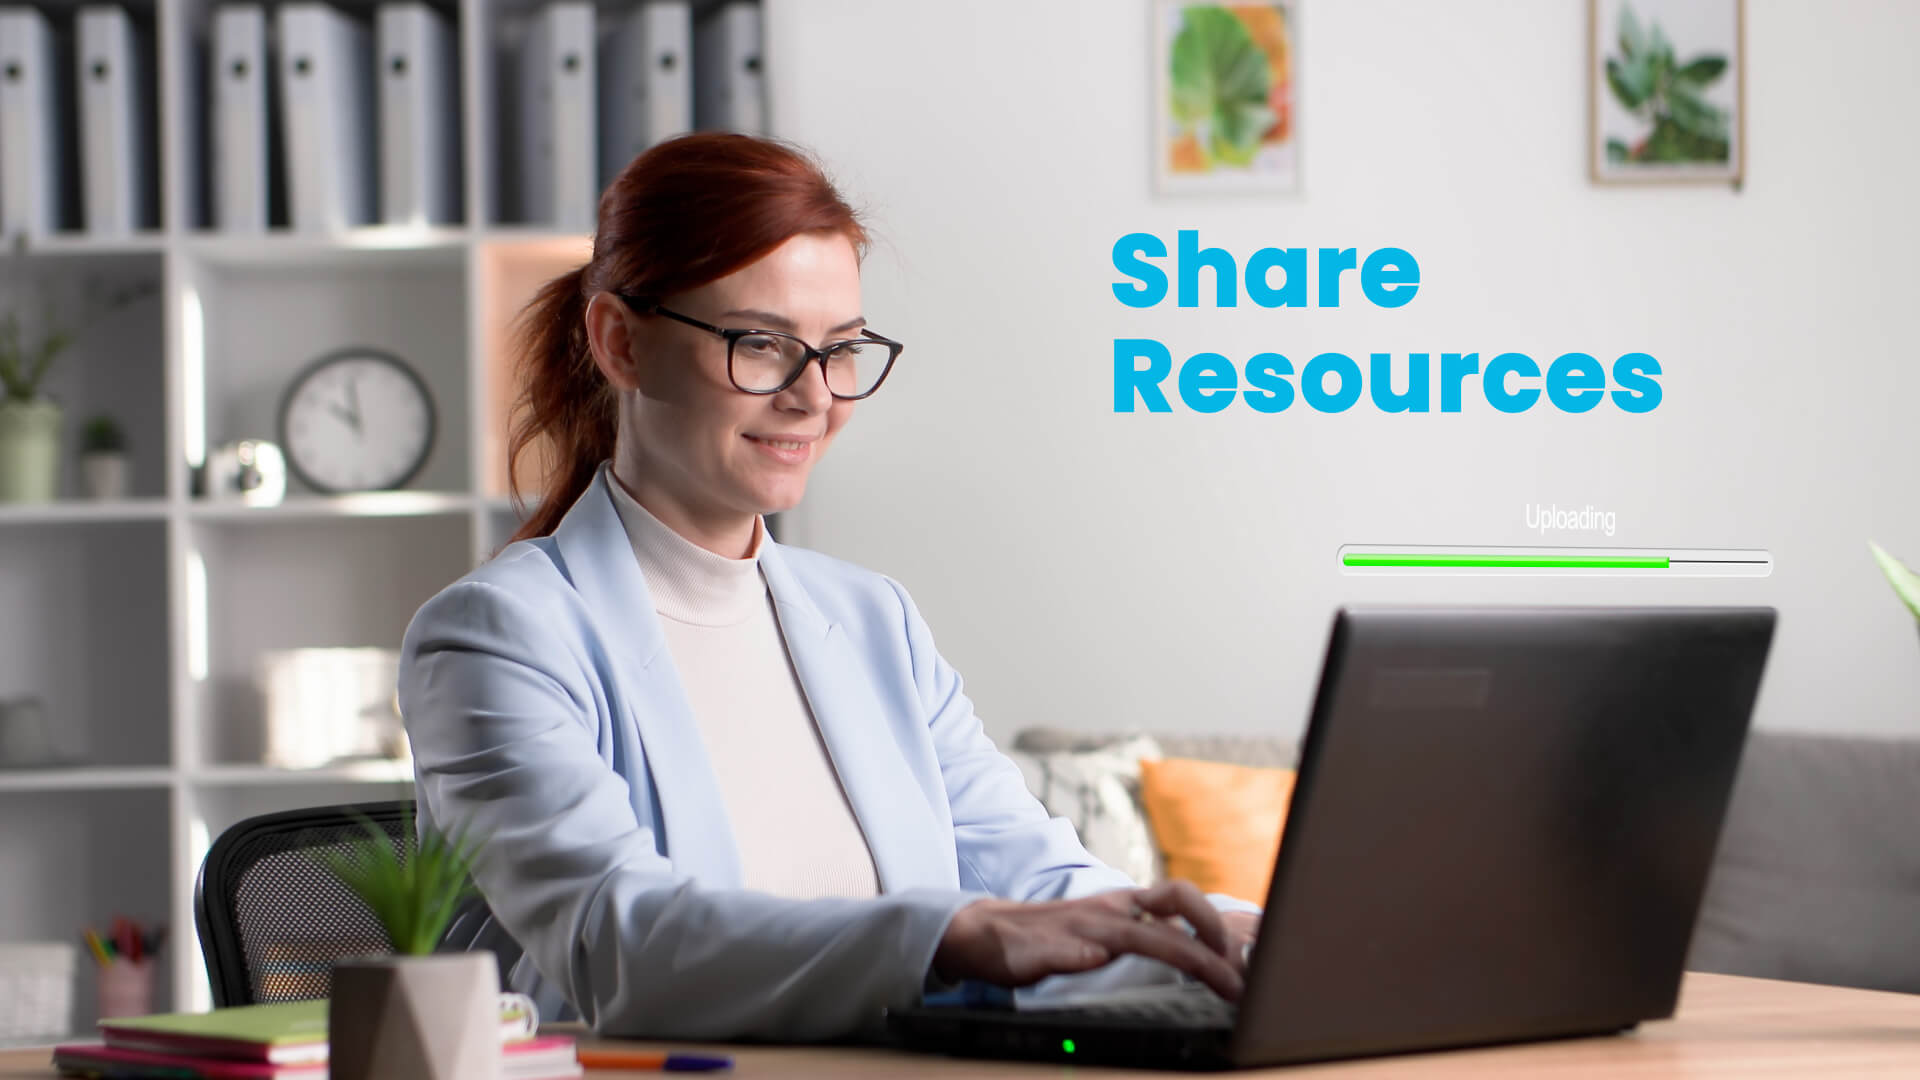 Share Resources